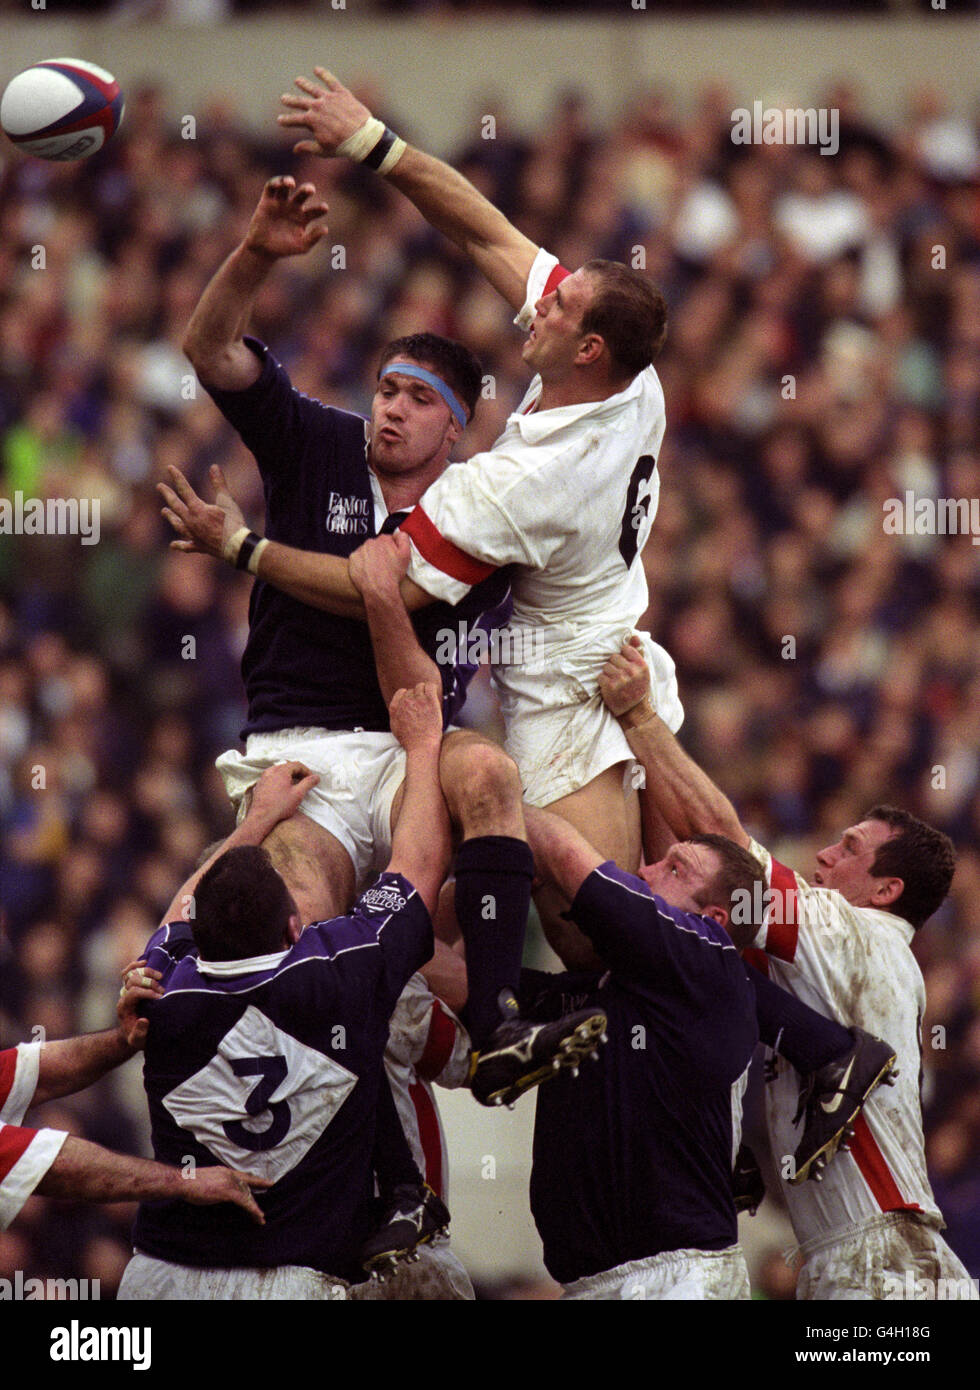 England's Lawrence Dallaglio (right) rises to the challenge in the line-out against Scotland's Scott Murray during the Calcutta Cup victory over Scotland at Twickenham. England won 24-21. Stock Photo